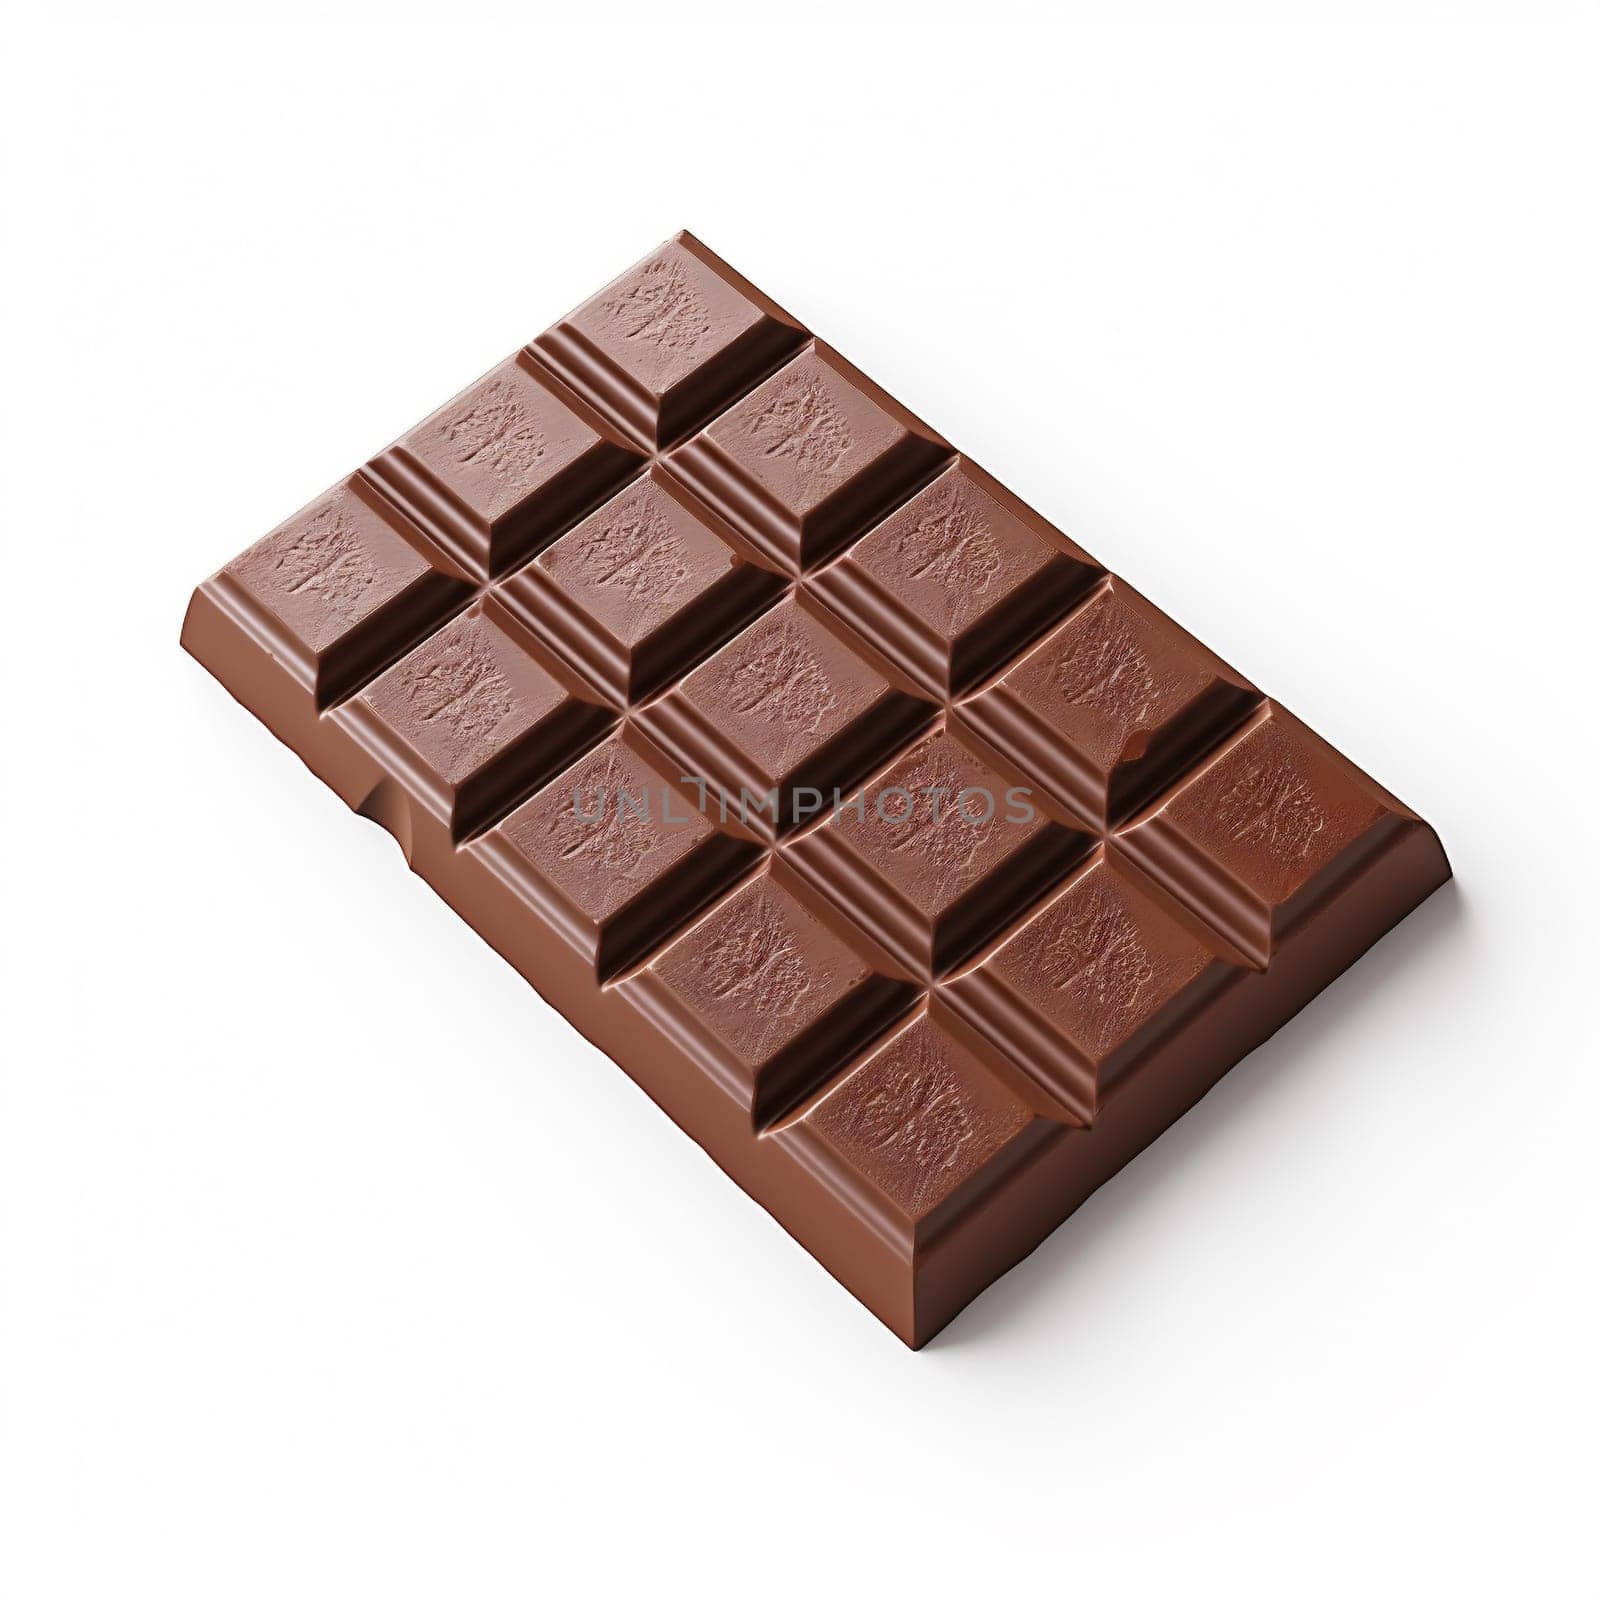 Milk Chocolate Bar Isolated on White Background. Top View.